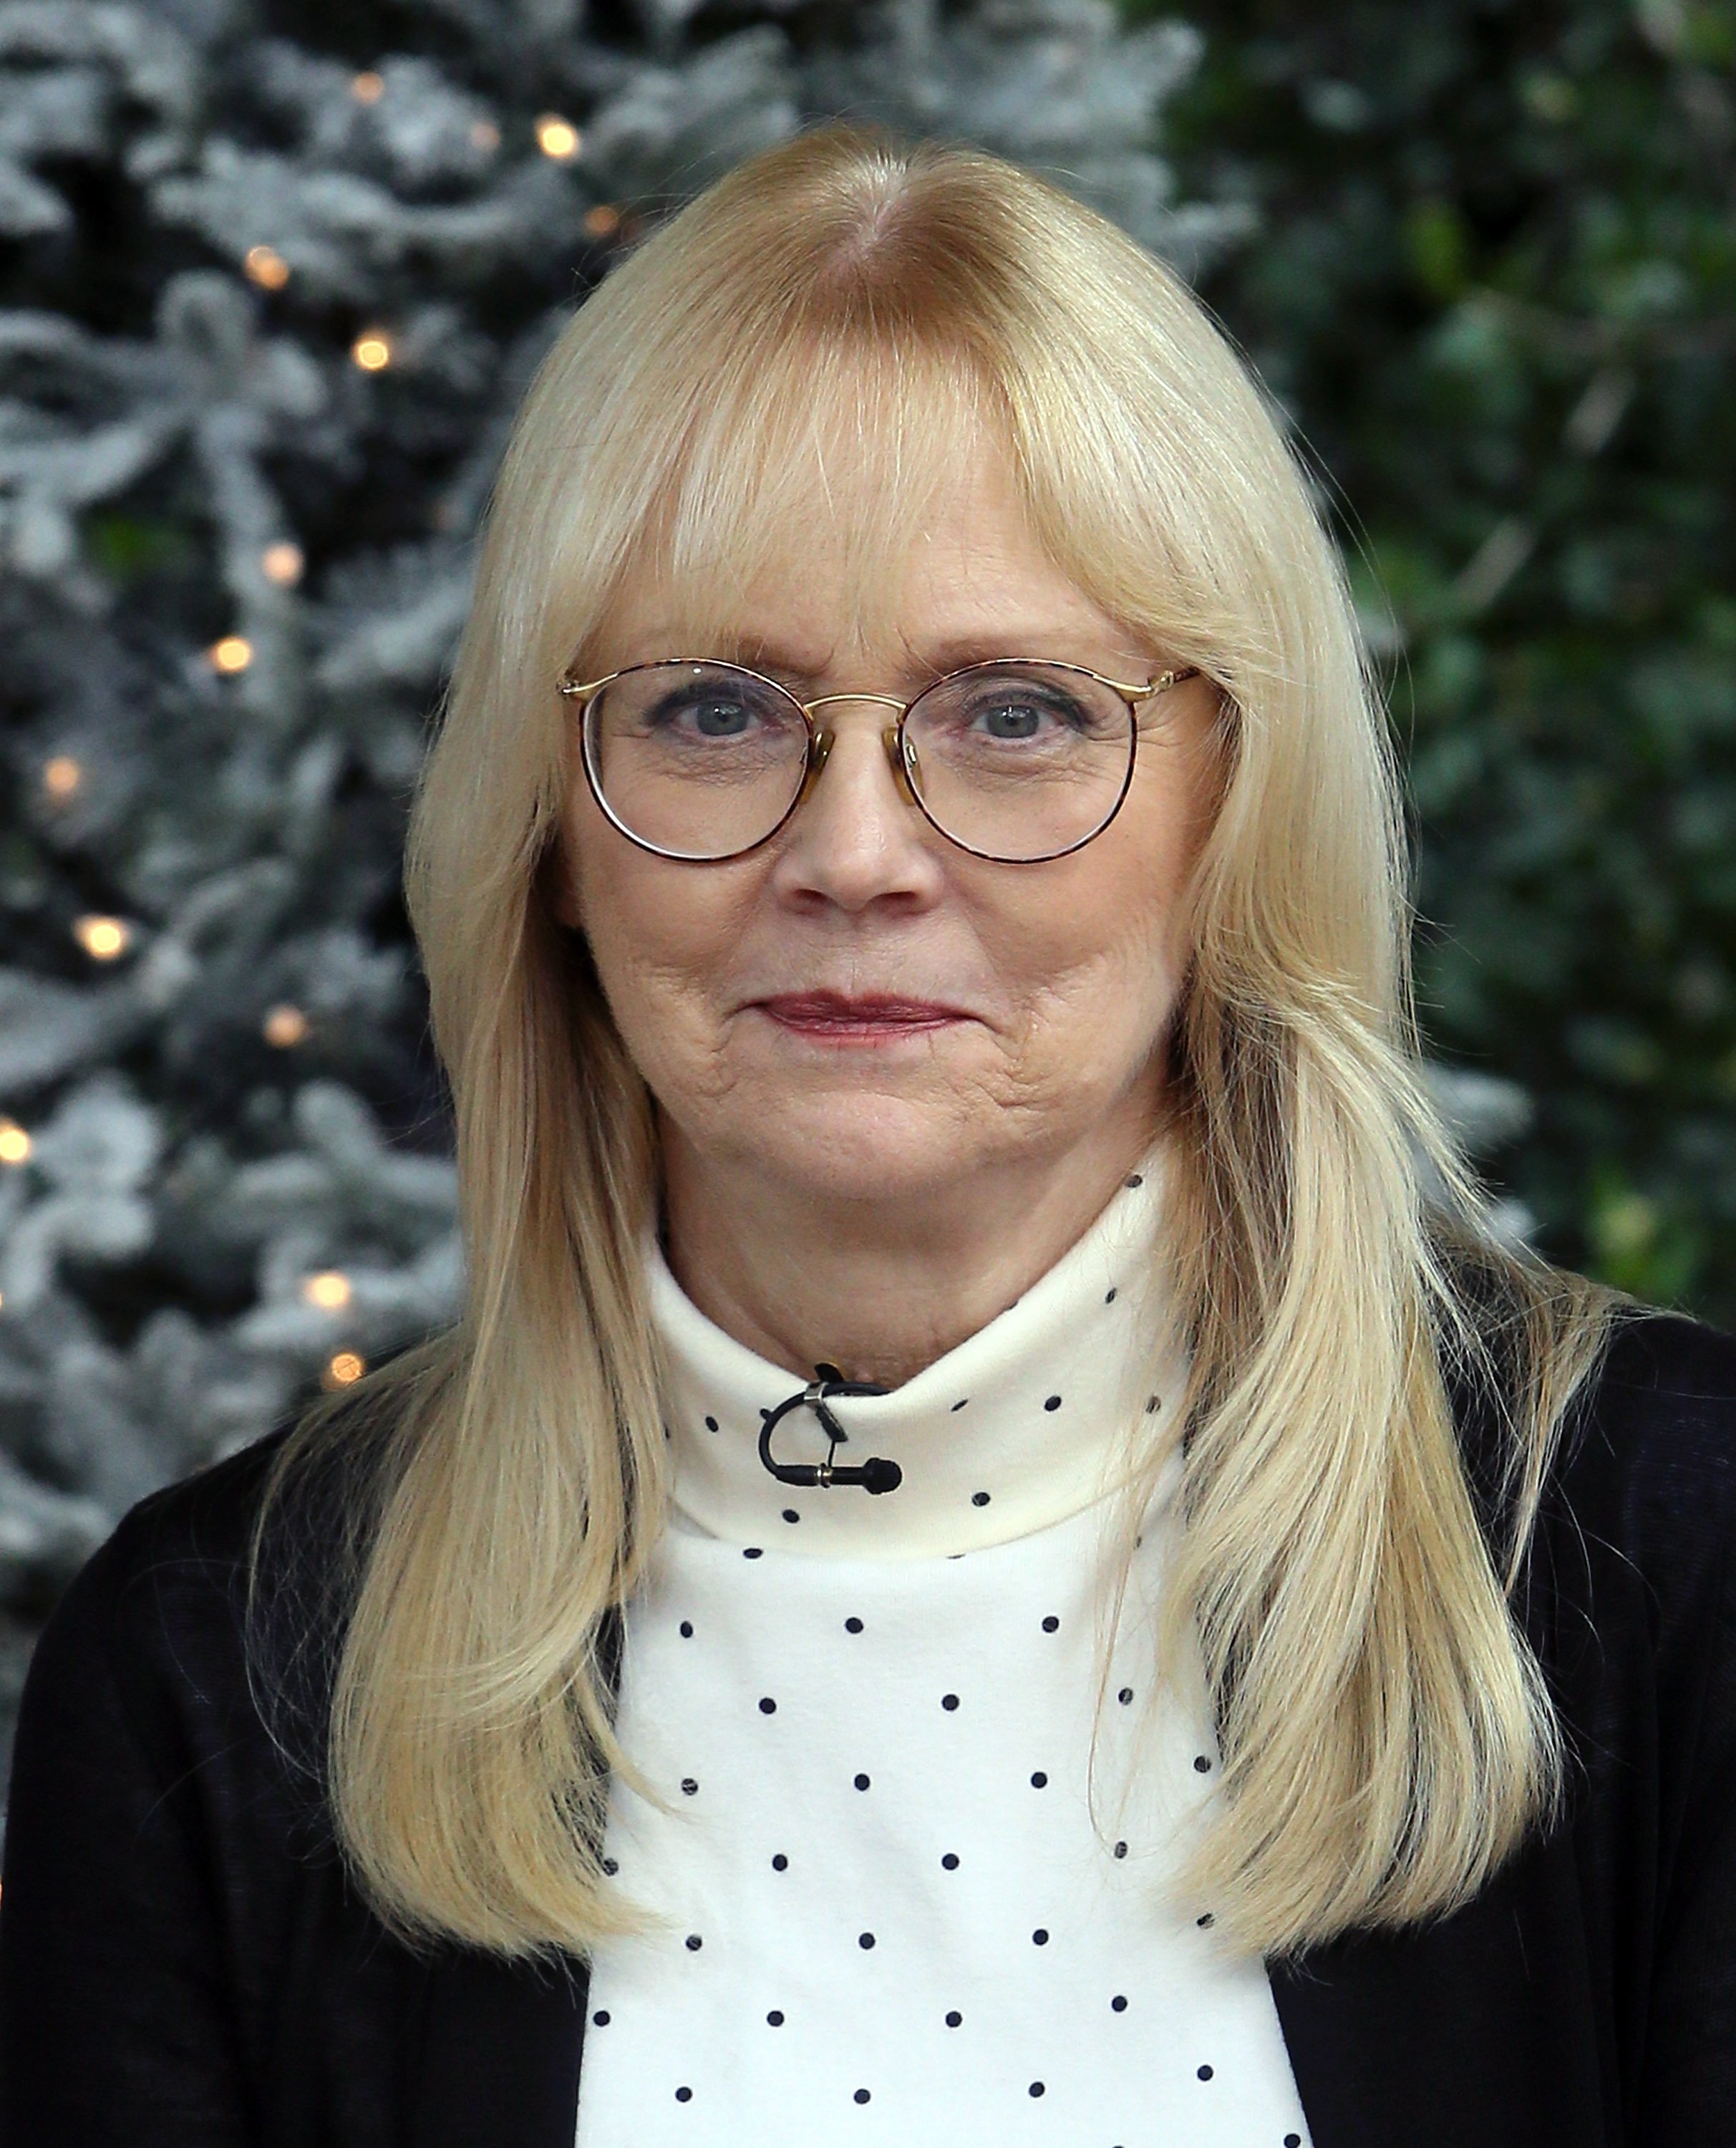 List 92+ Images recent pictures of shelley long Stunning